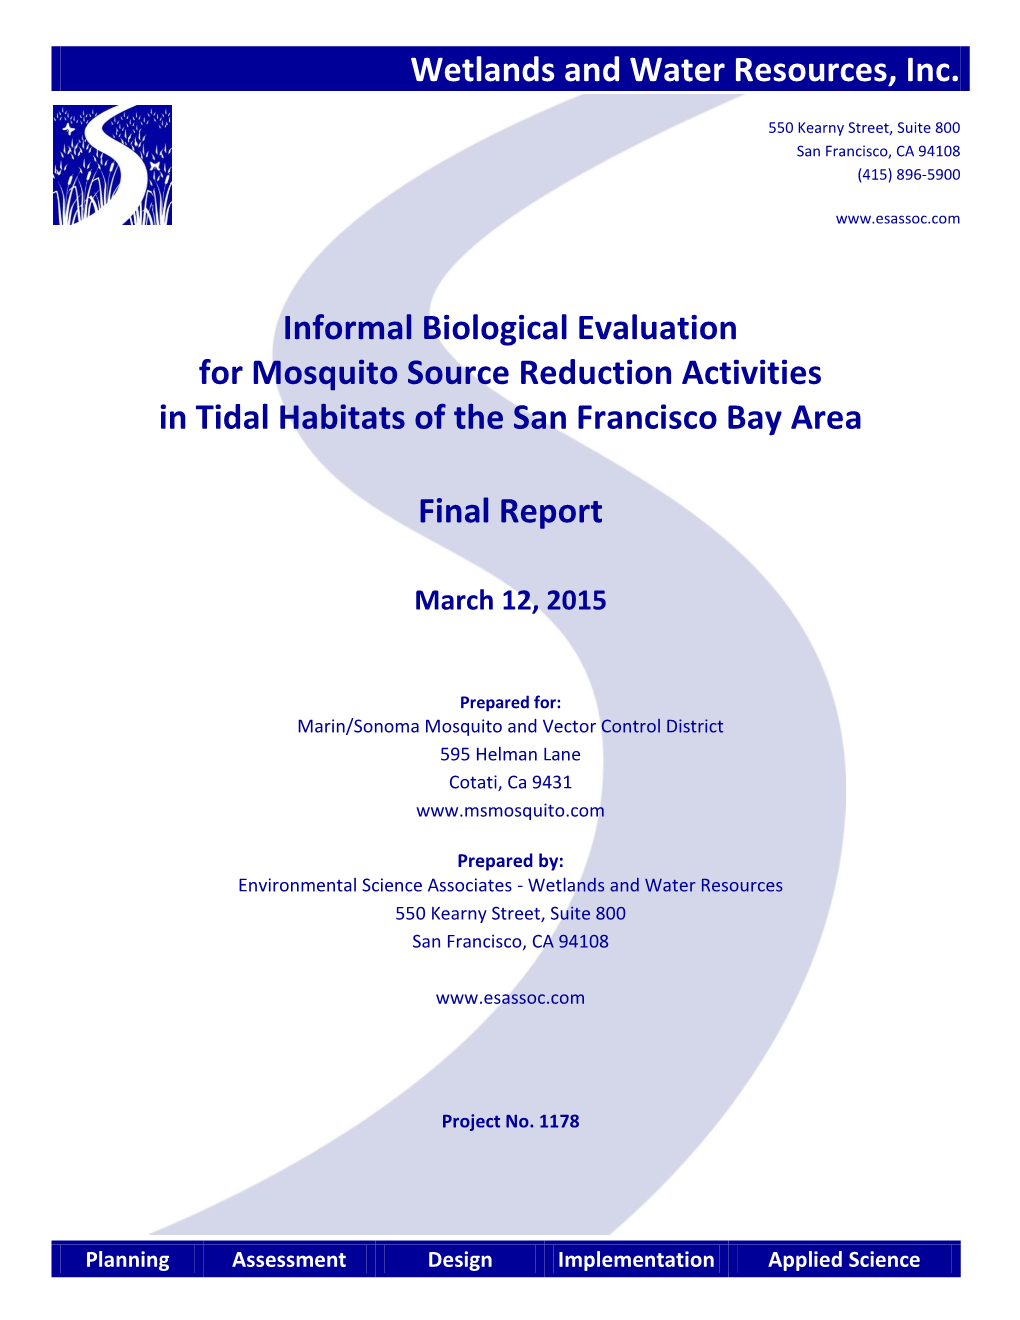 Informal Biological Evaluation for Mosquito Source Reduction Activities in Tidal Habitats of the San Francisco Bay Area